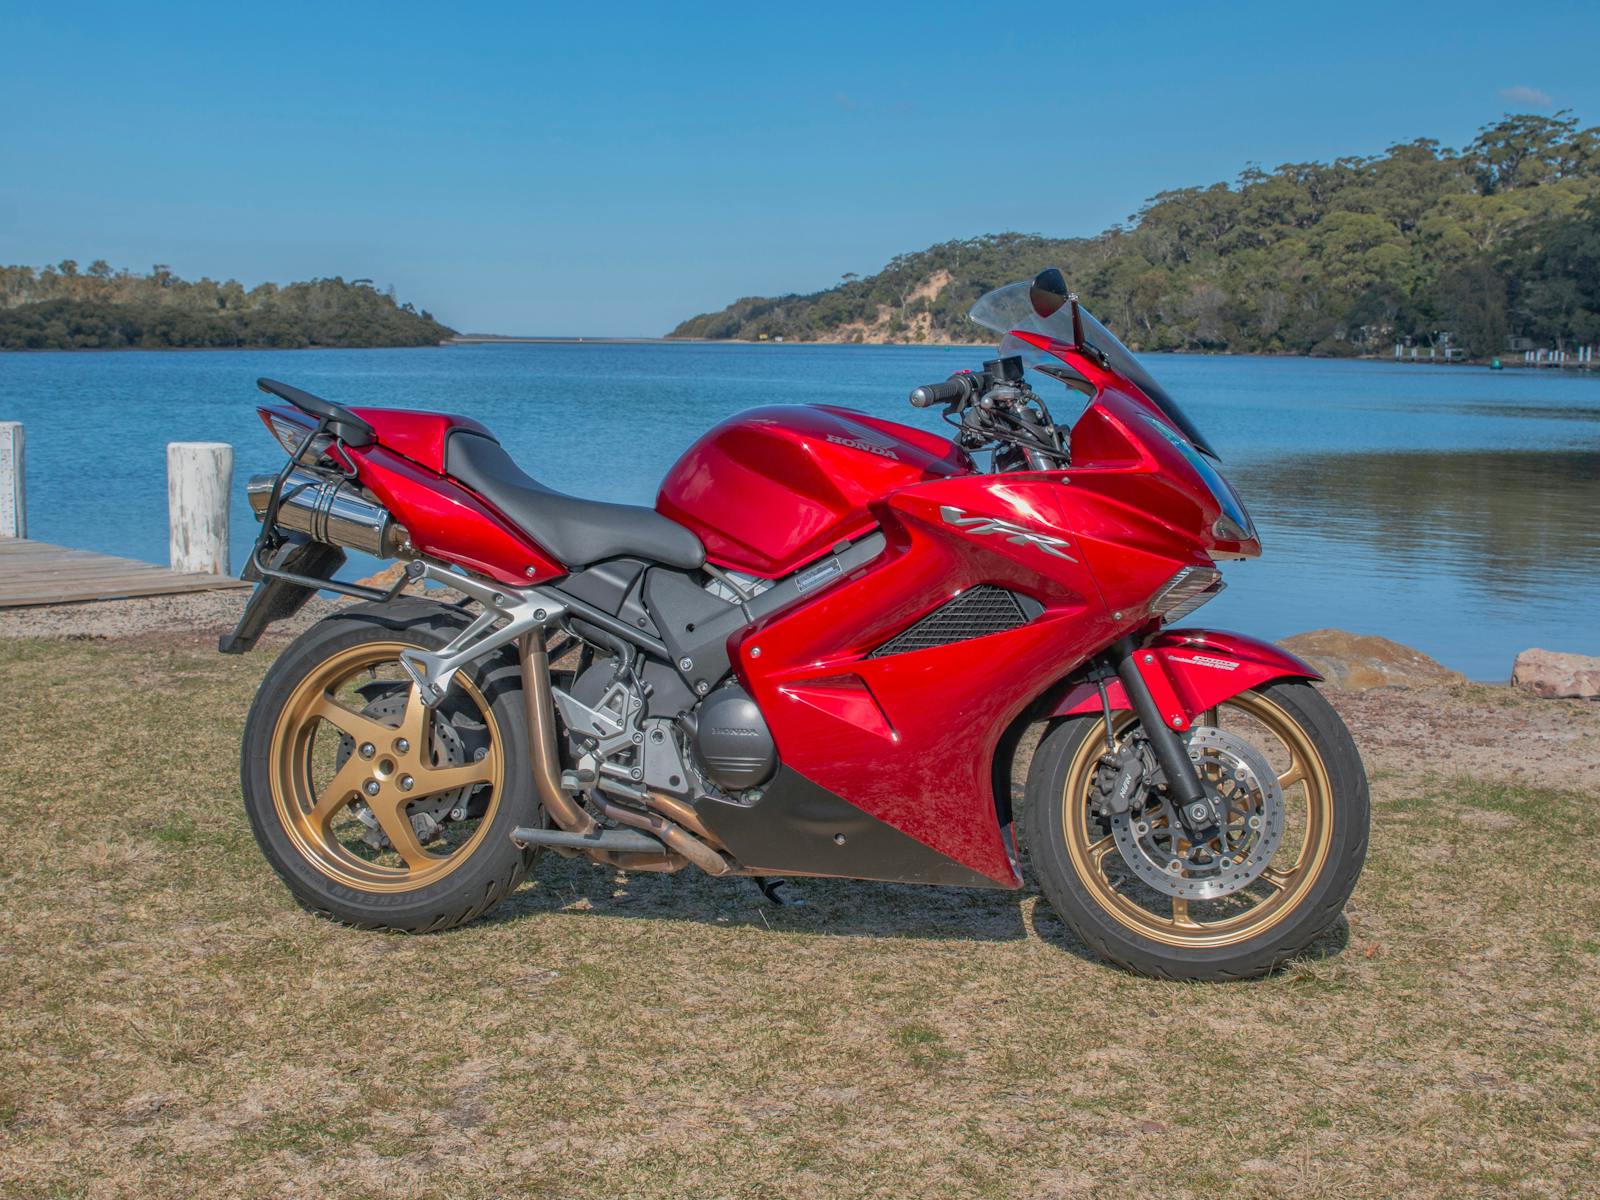 Fuji // 2010 Honda VFR800F // To many the VFR800 is considered the best Sports Tourer ever produced.